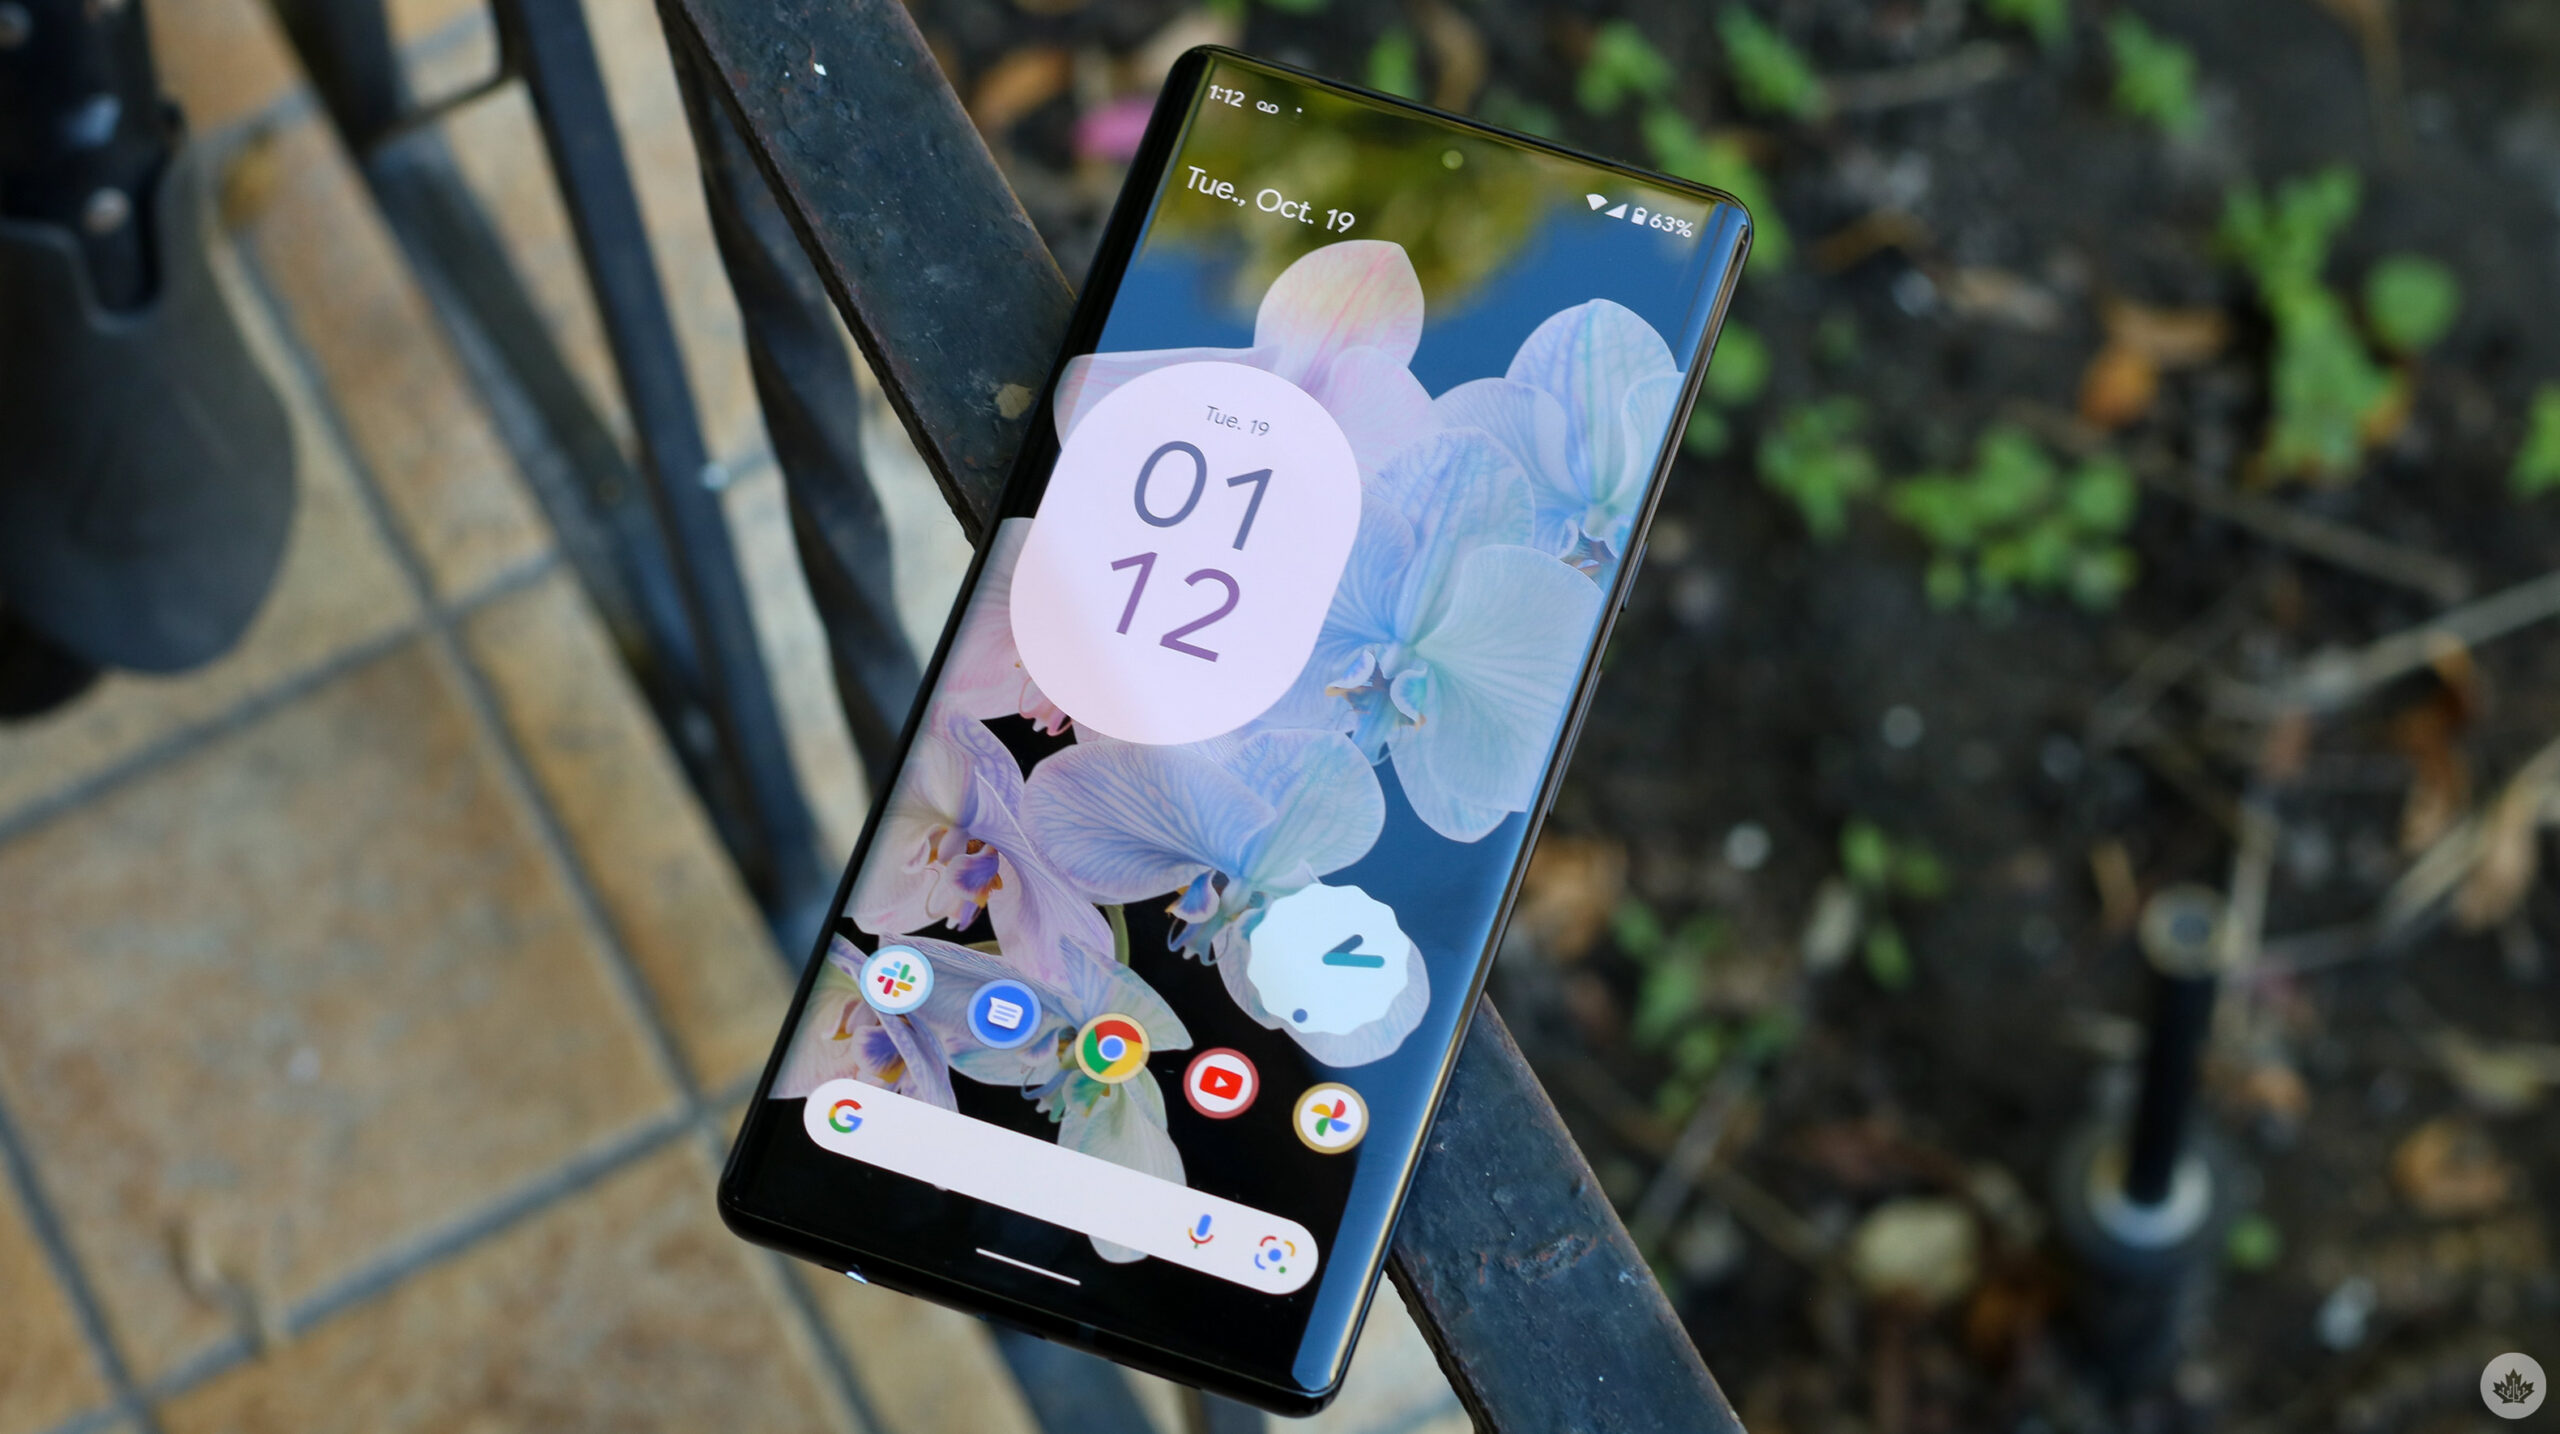 One year later, the Pixel 6 Pro is still Google's best smartphone